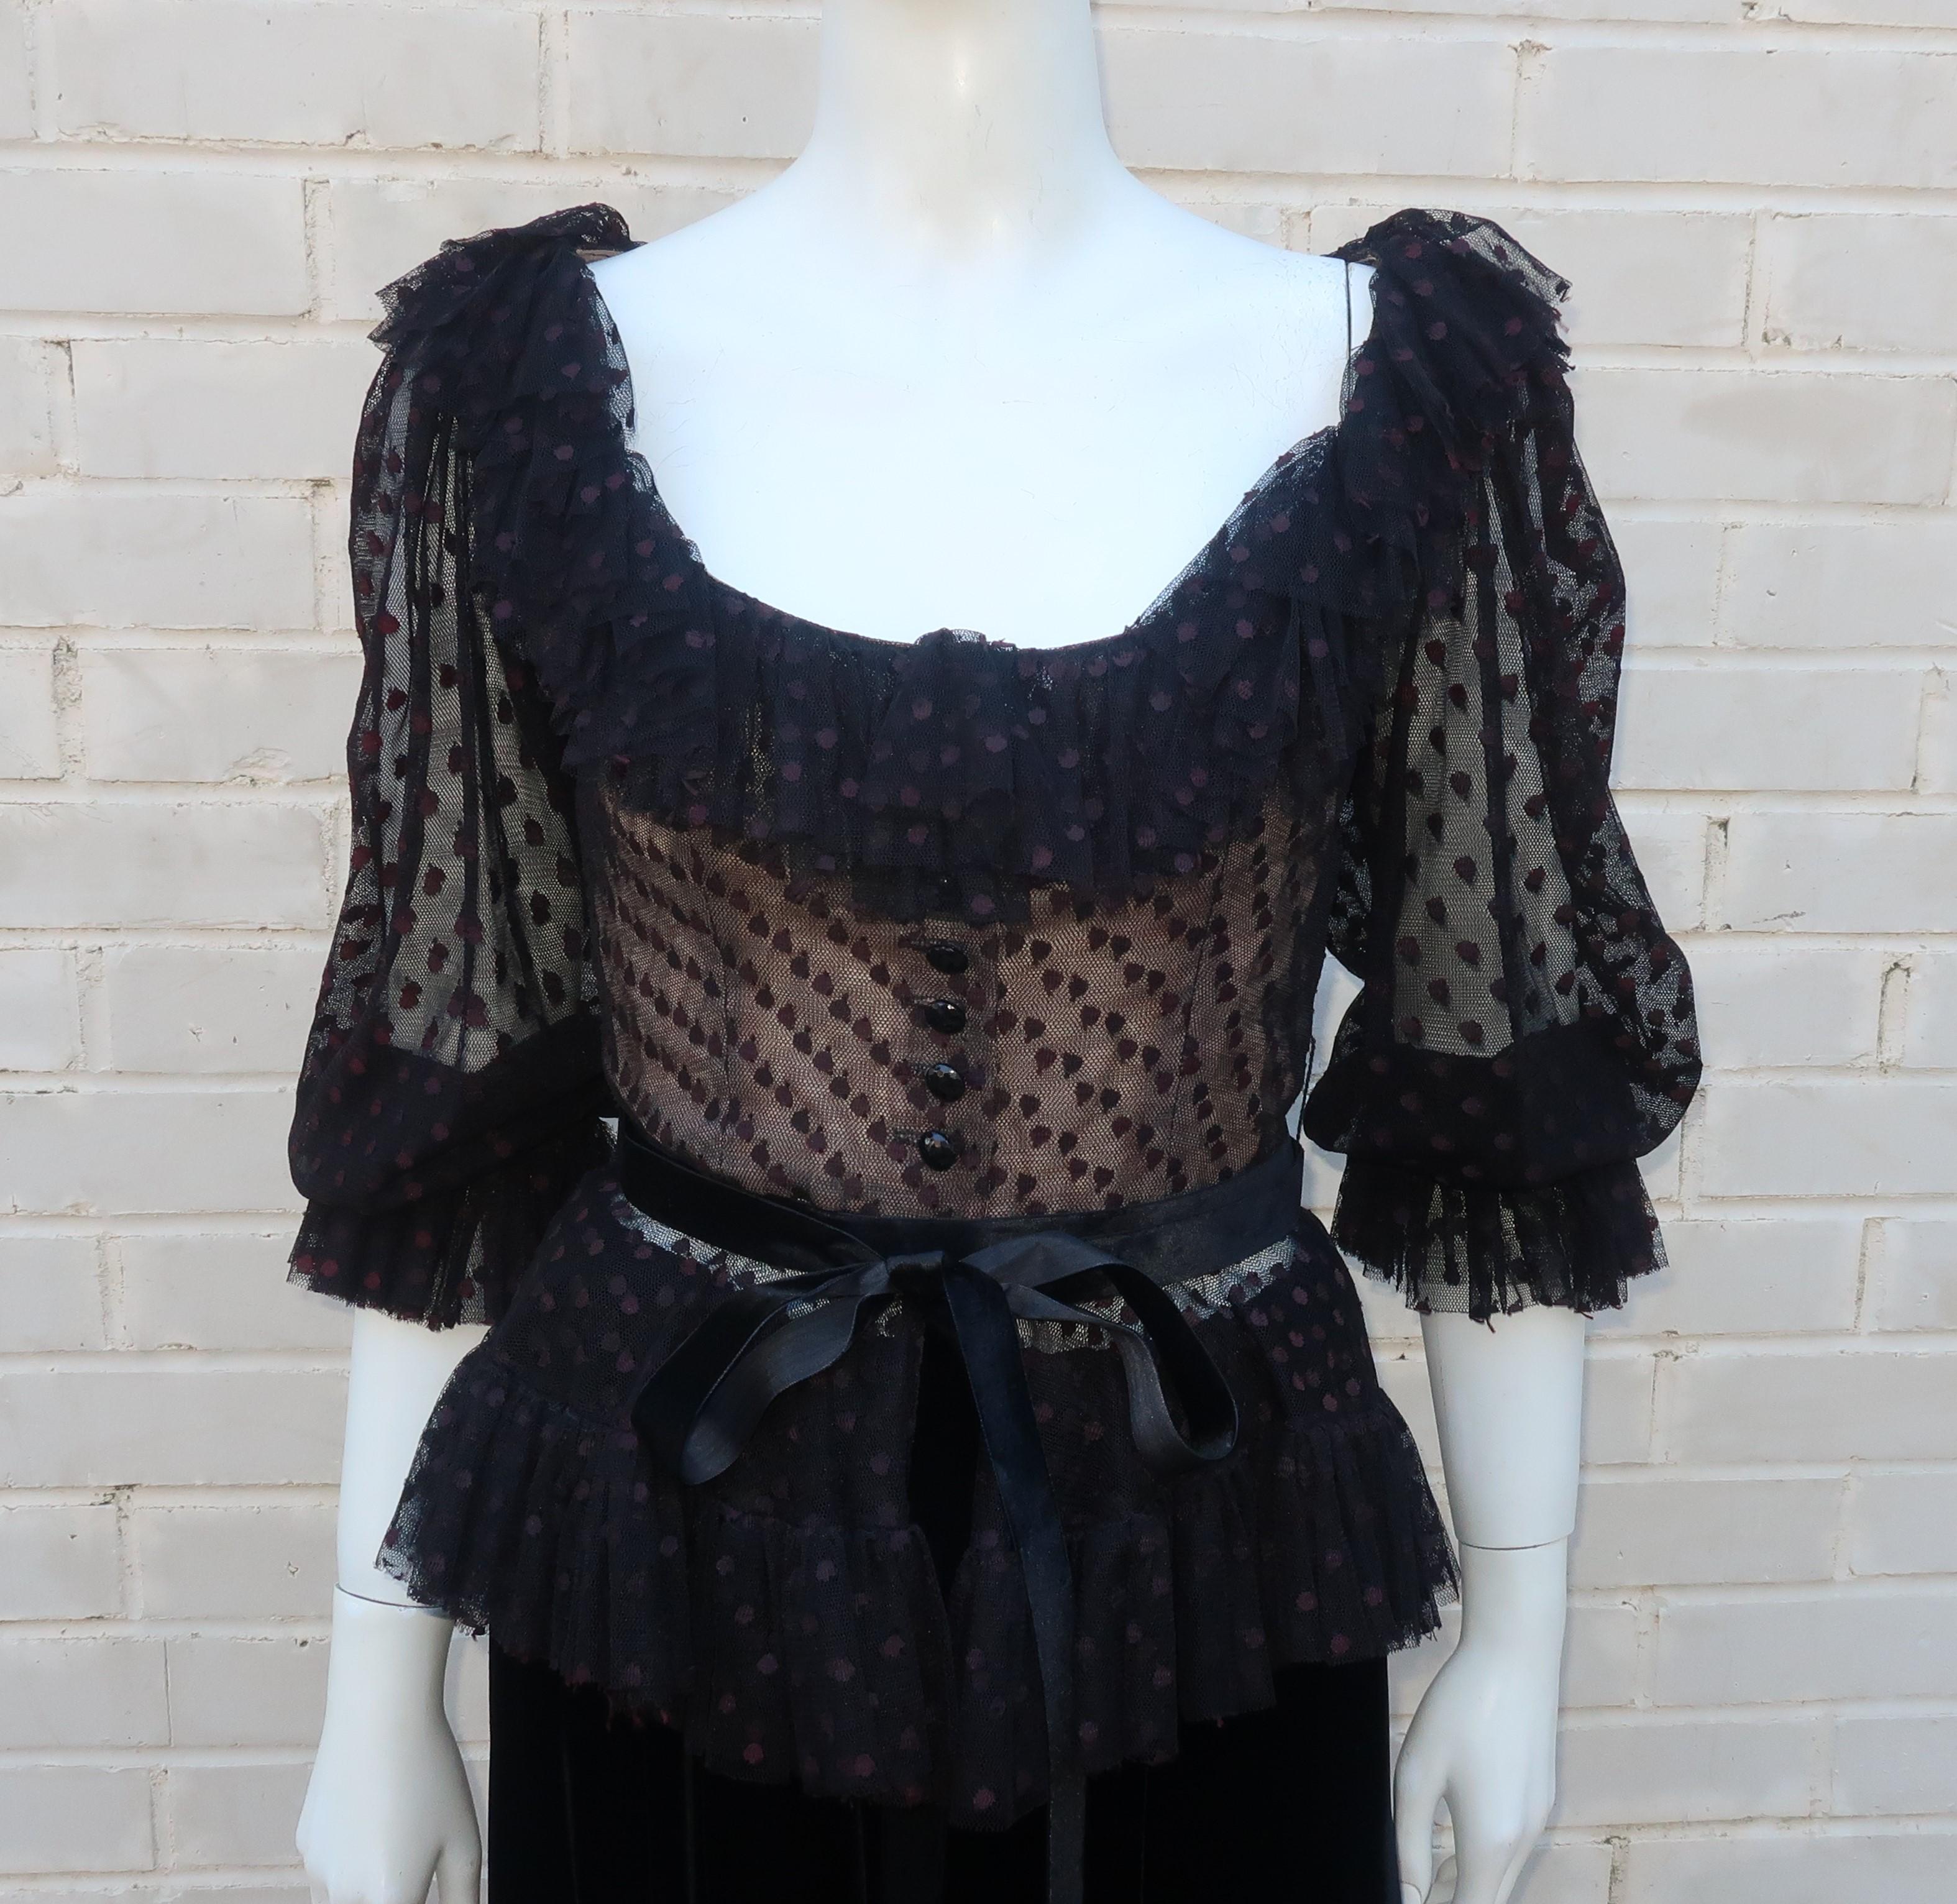 Oscar de La Renta two piece black dress with a dot netted peasant style peplum top and full velvet skirt.  The top buttons down the front with a ruffled collar and full sleeves with elasticized cuffs.  It has a nude illusion modesty lining and